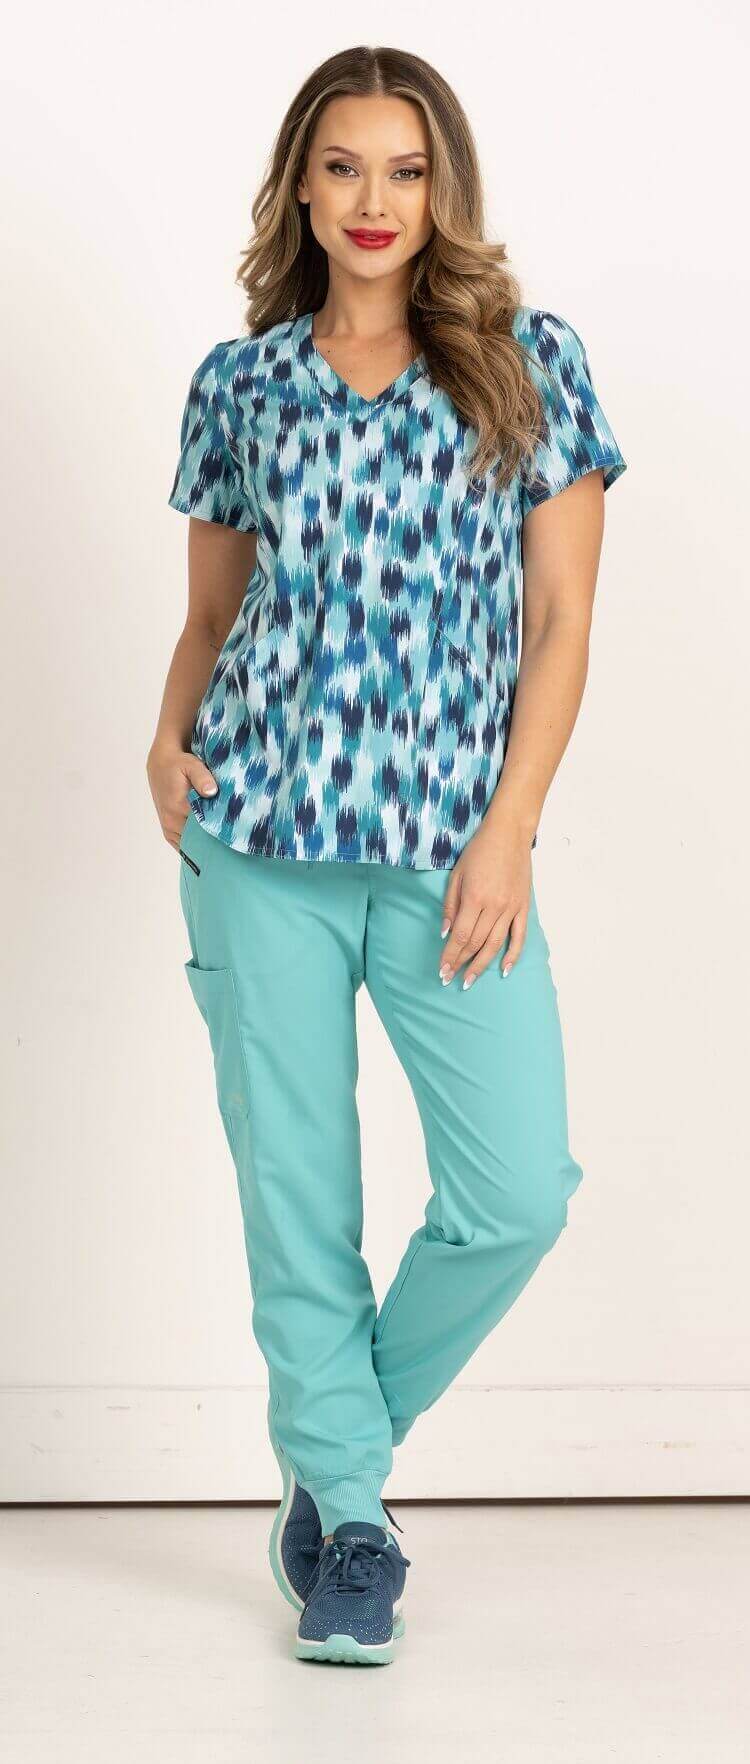 A full body image of a young female LPN wearing a Meraki Sport Women's Print Scrub Top in size Small featuring shoulder yokes for shaping & side slits for additional range of motion.